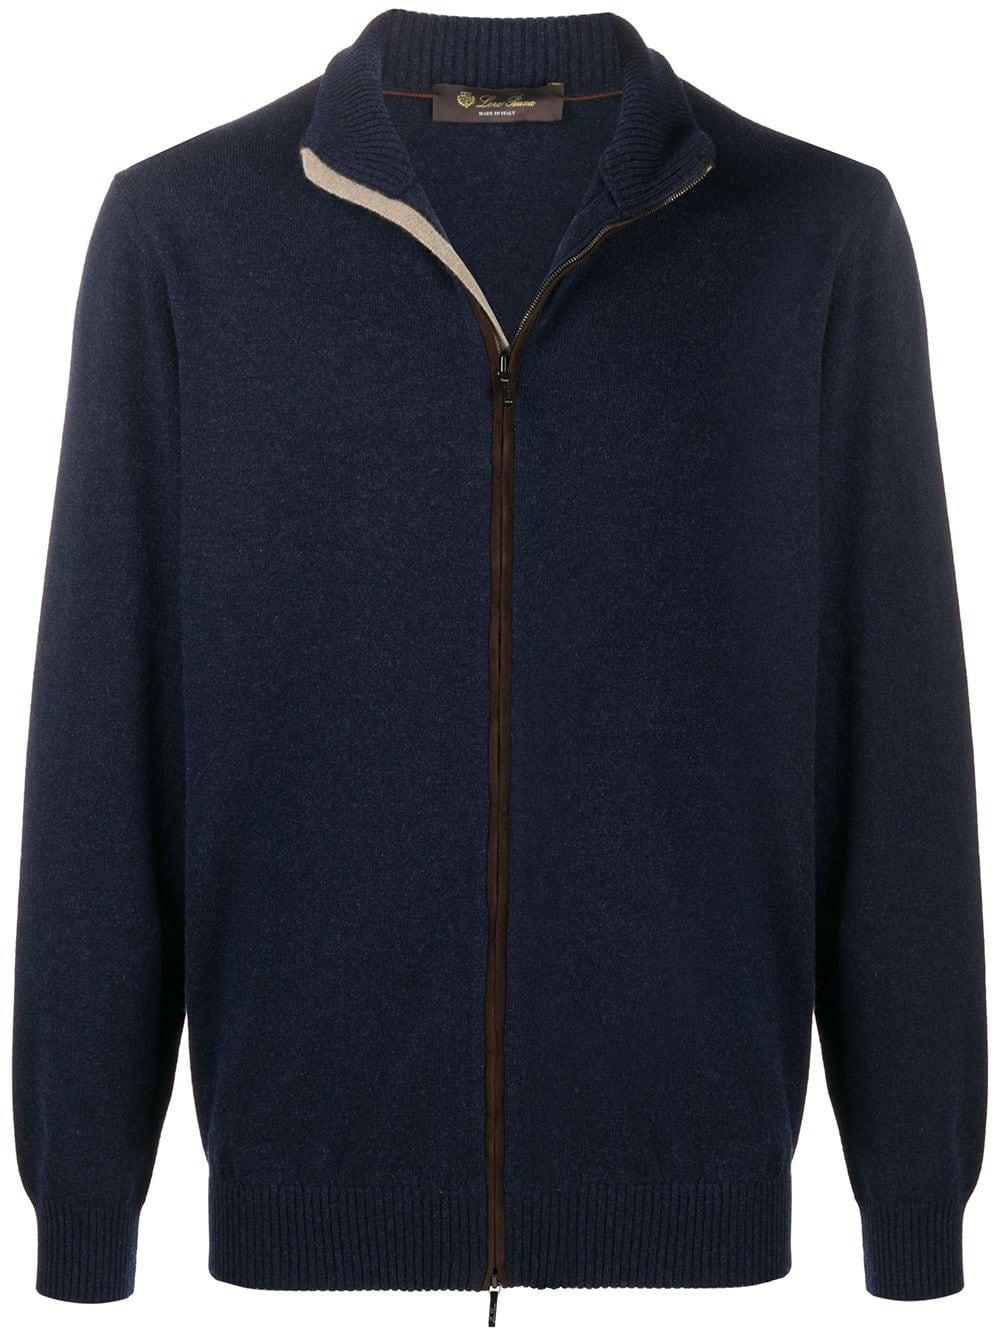 Loro Piana Cashmere Zip-front Cardigan in Blue for Men - Lyst